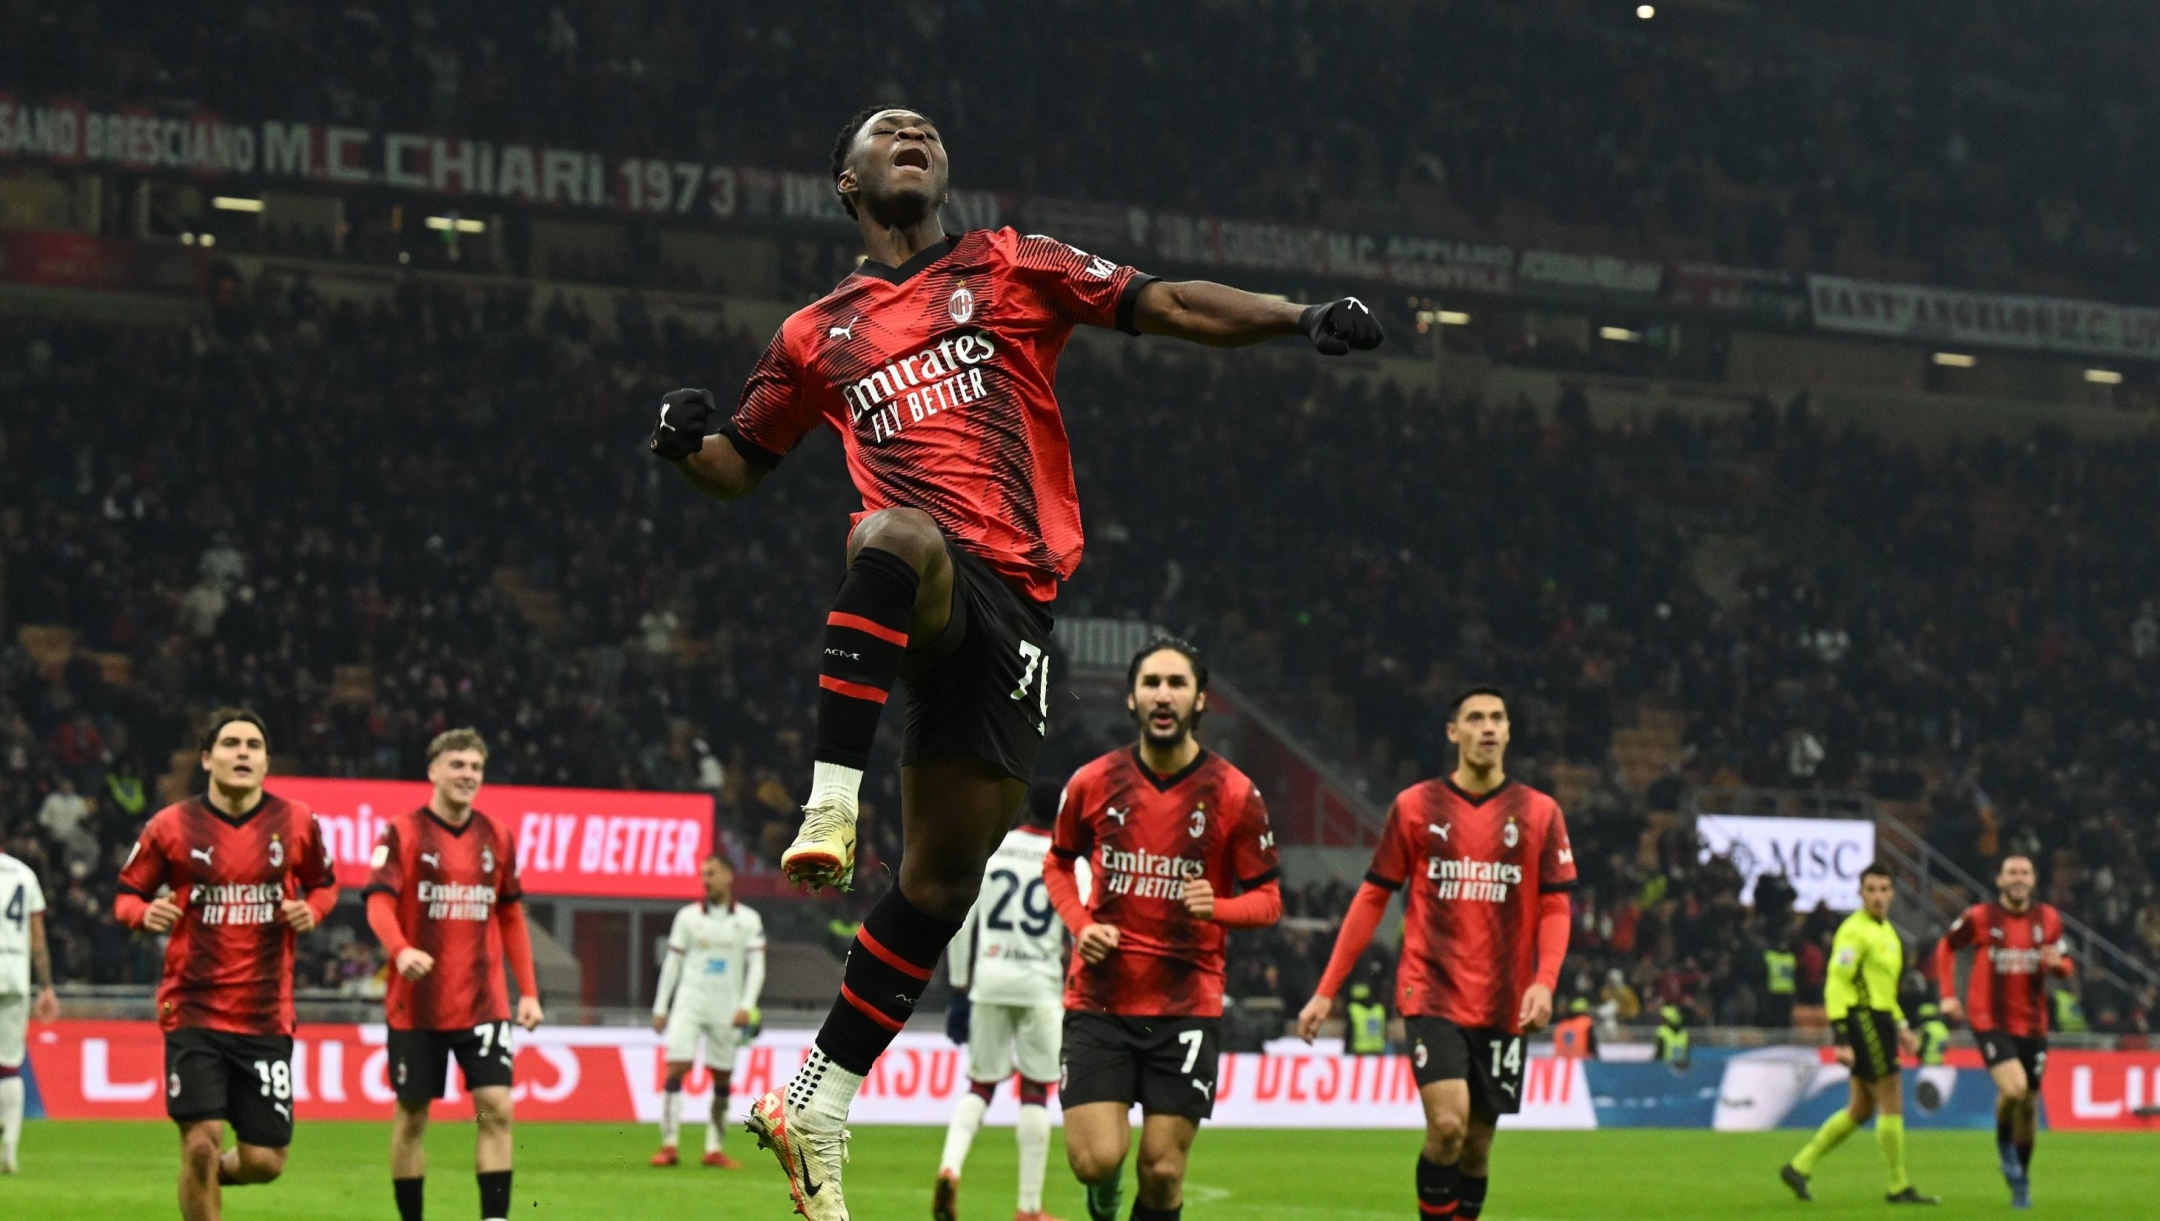 MILAN, ITALY - JANUARY 02:  Chaka Traore of AC Milan celebrates after scoring the goal during the Coppa Italia match between AC Milan and Cagliari Calcio on January 02, 2024 in Milan, Italy. (Photo by Claudio Villa/AC Milan via Getty Images)